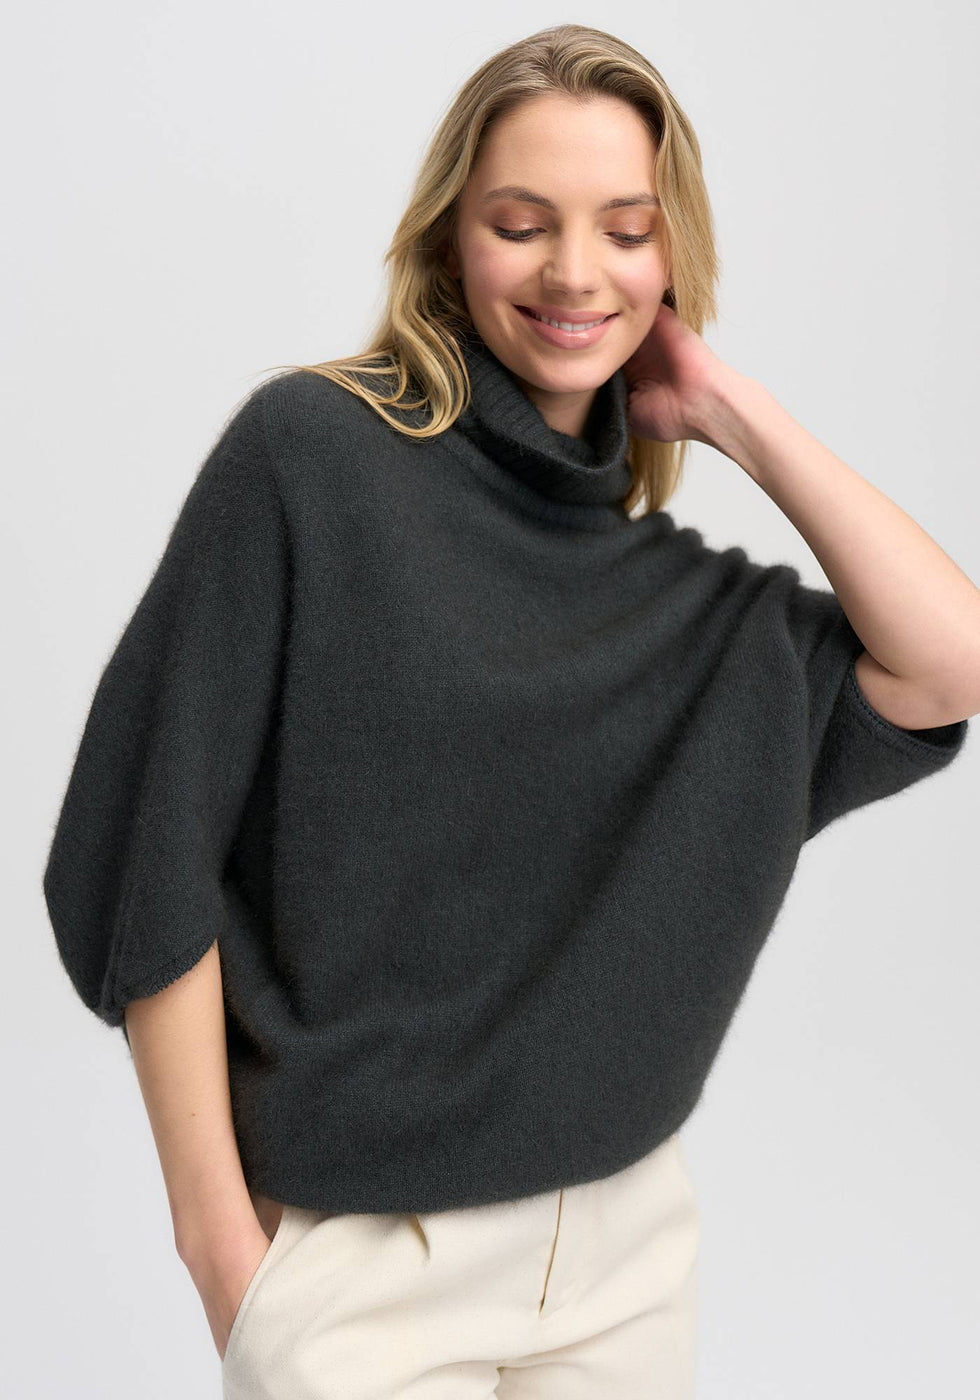 Untouched World Air Cape Sweater